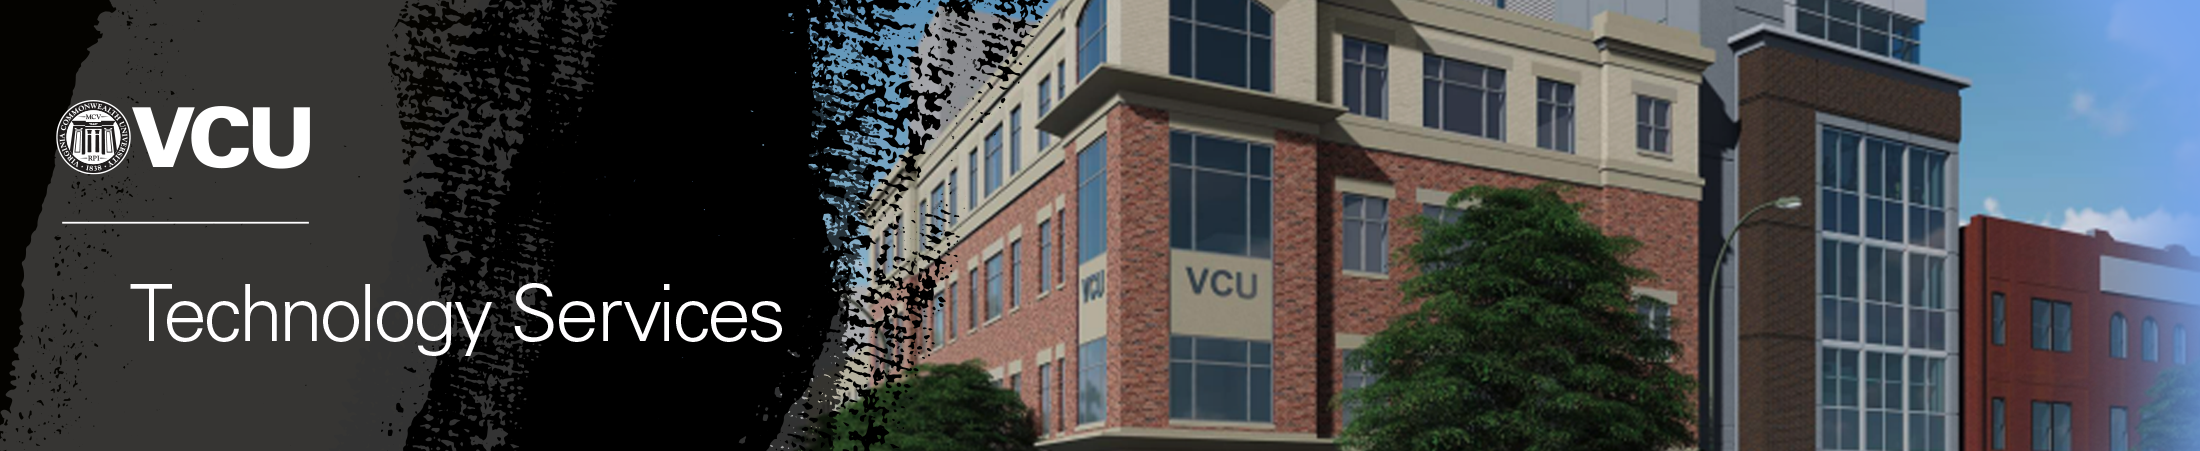 VCU Technology Services with building rendering